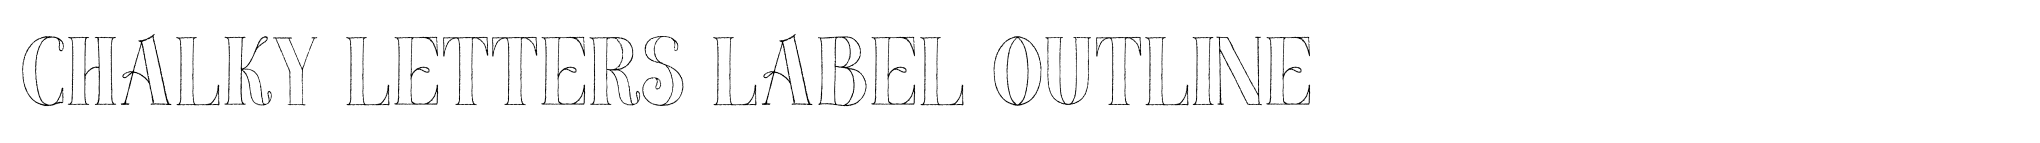 Chalky Letters Label Outline image